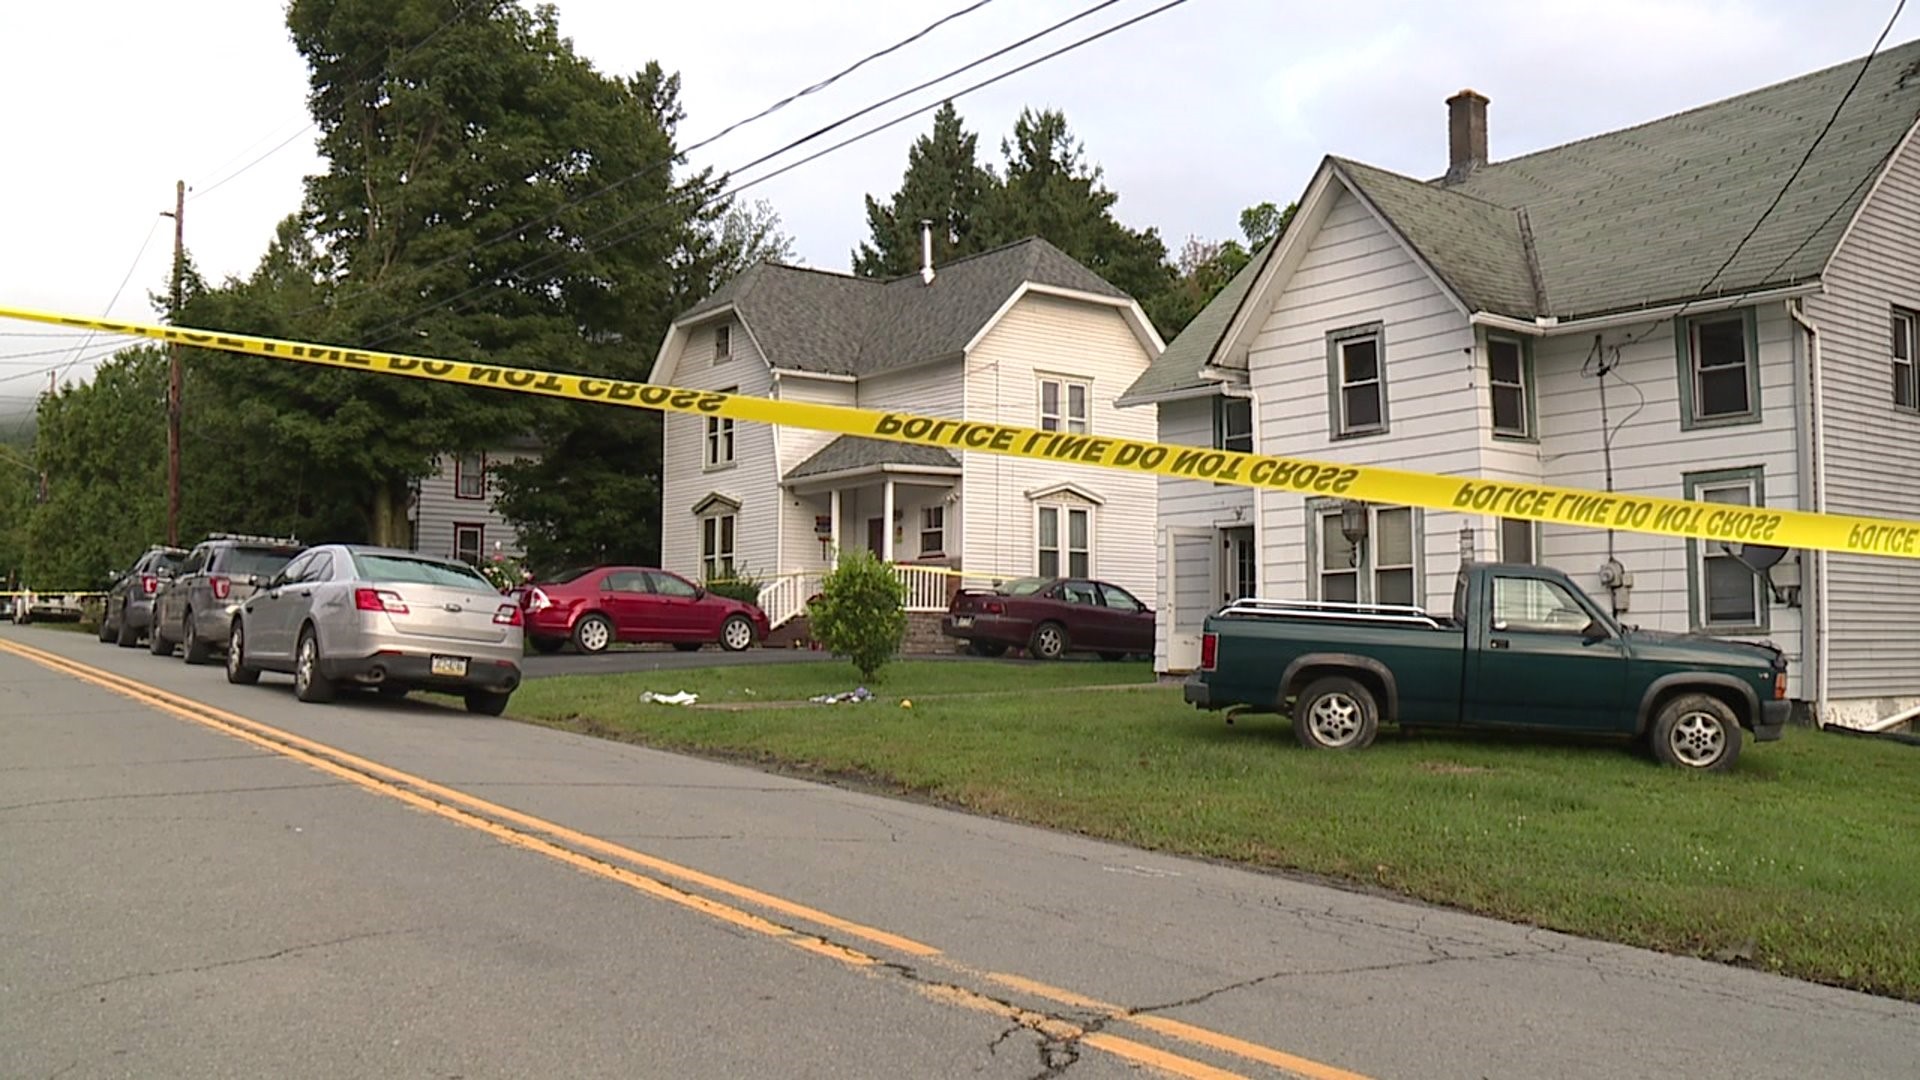 Man Shot by Troopers in Susquehanna County